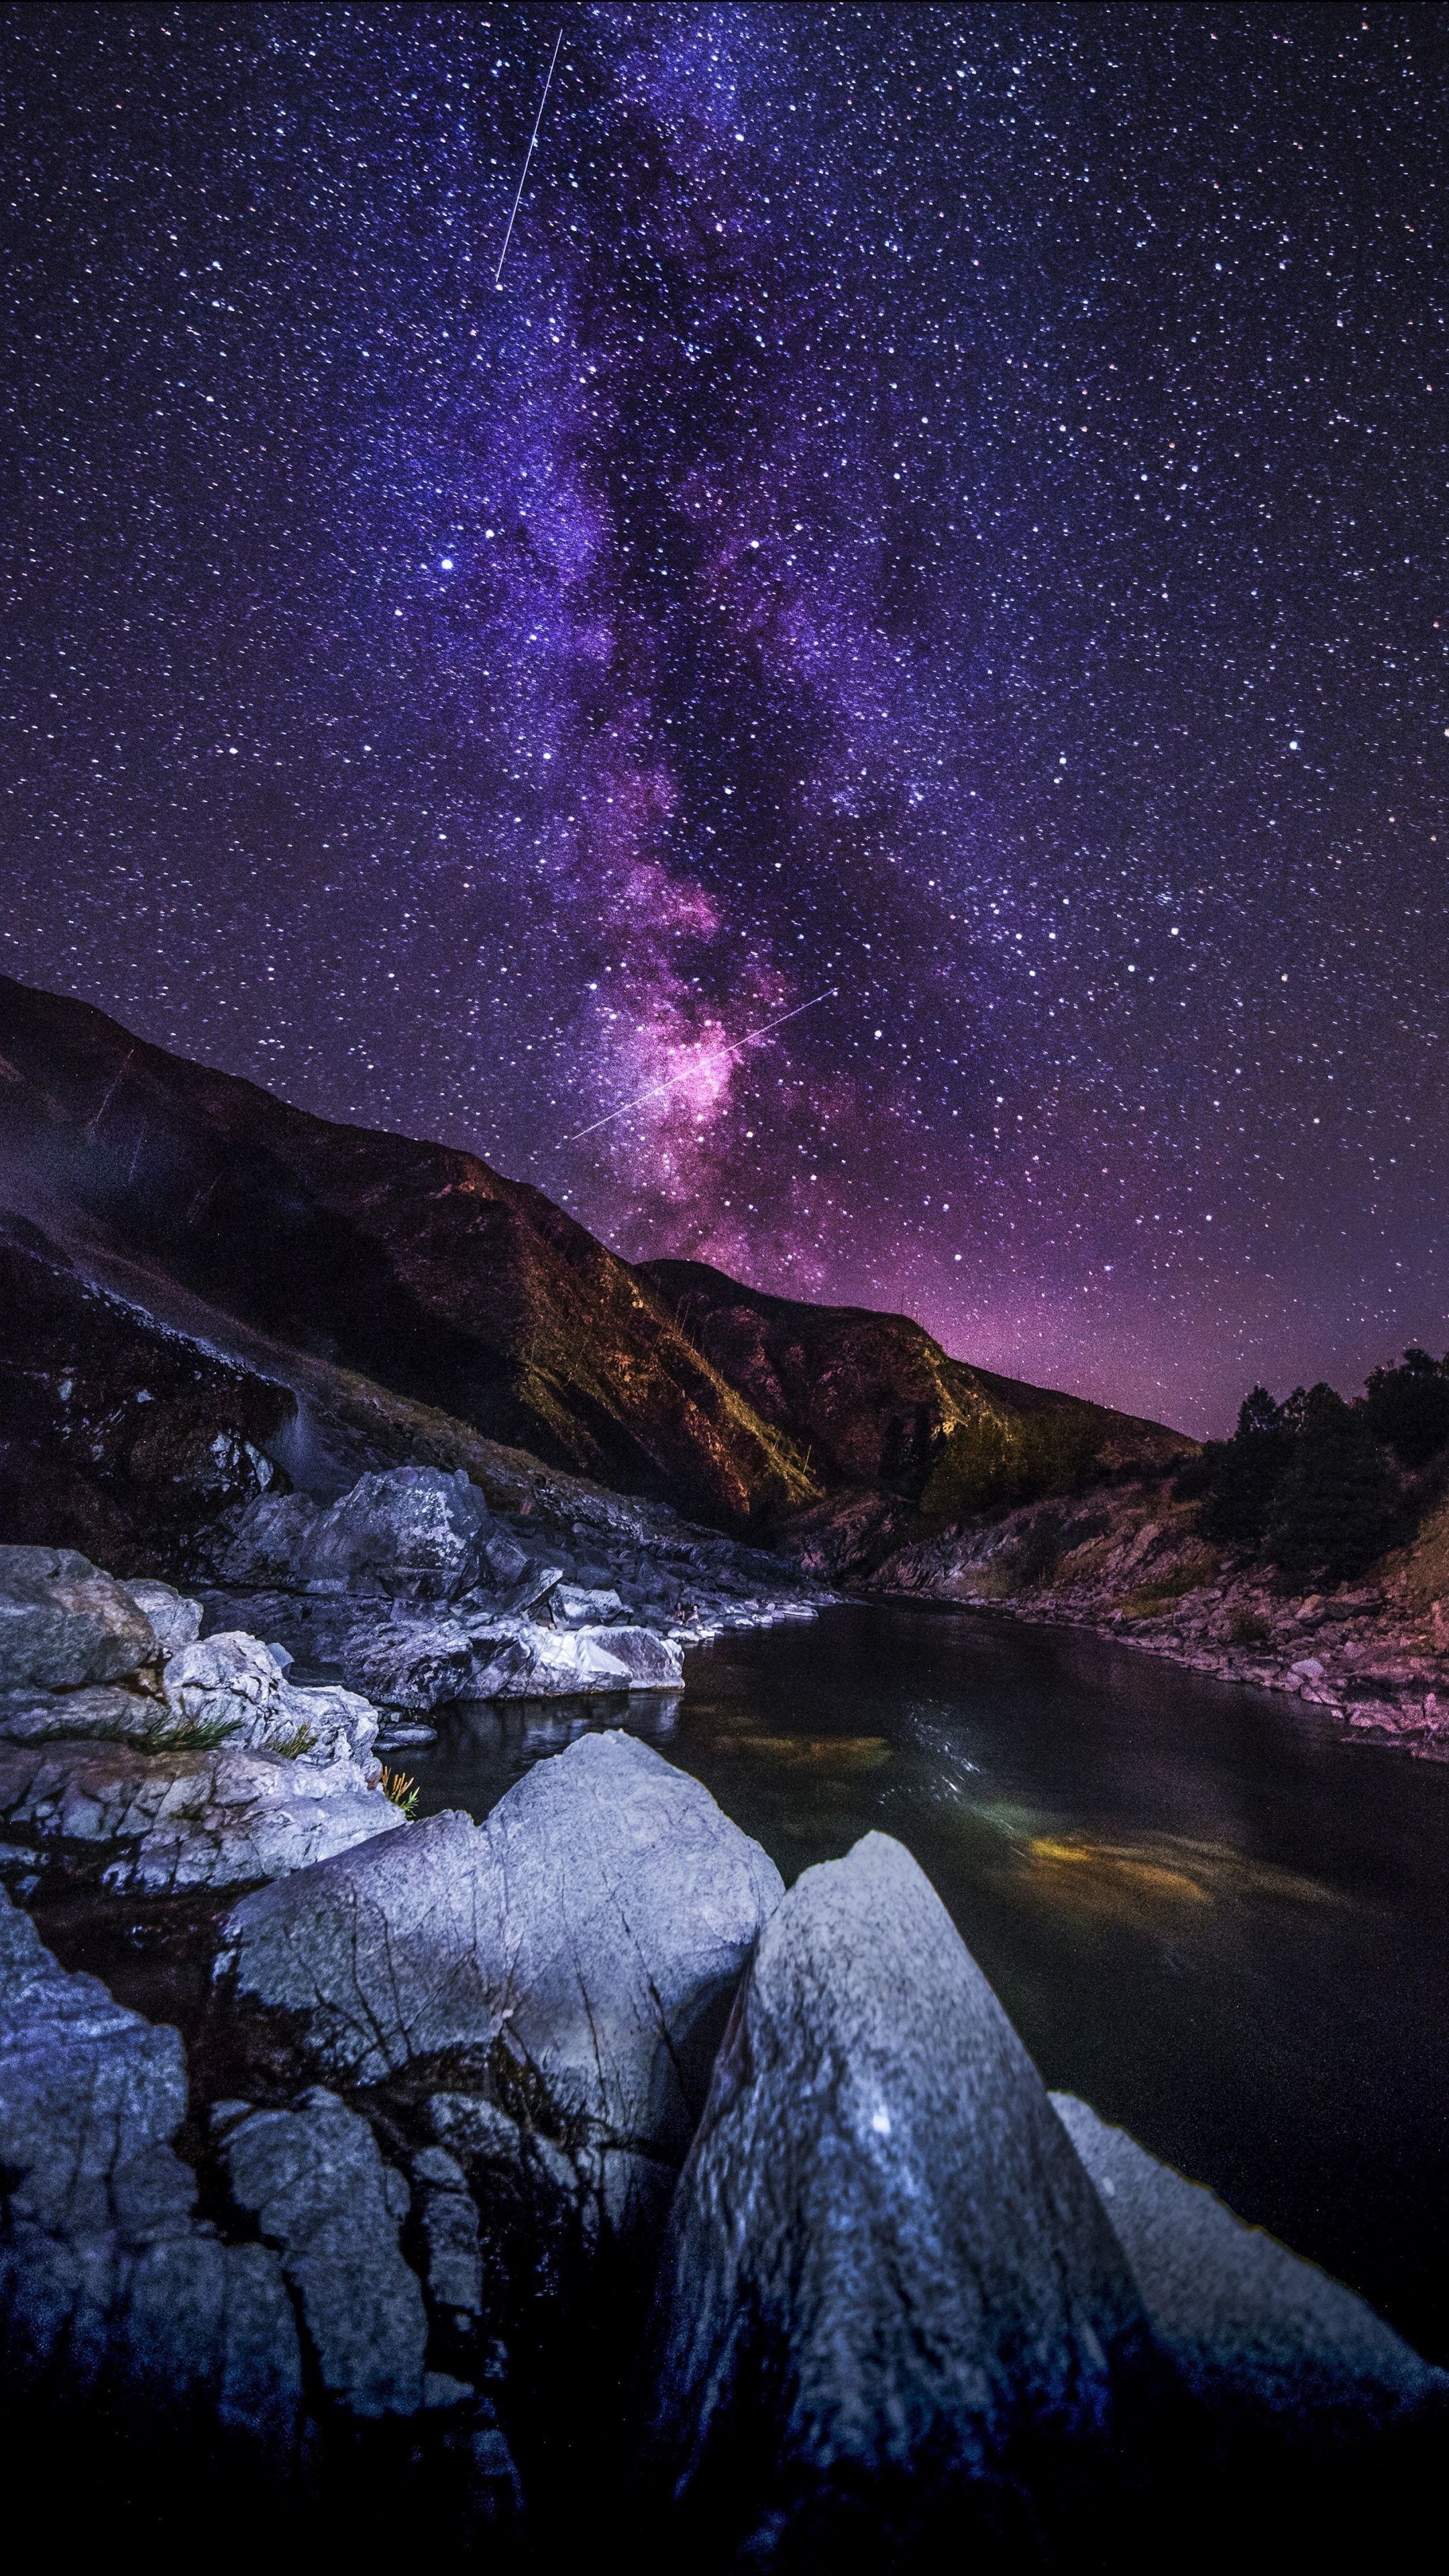 Starry sky, mountains, river, night wallpaper. iPhone wallpaper sky, Night skies, Nature picture